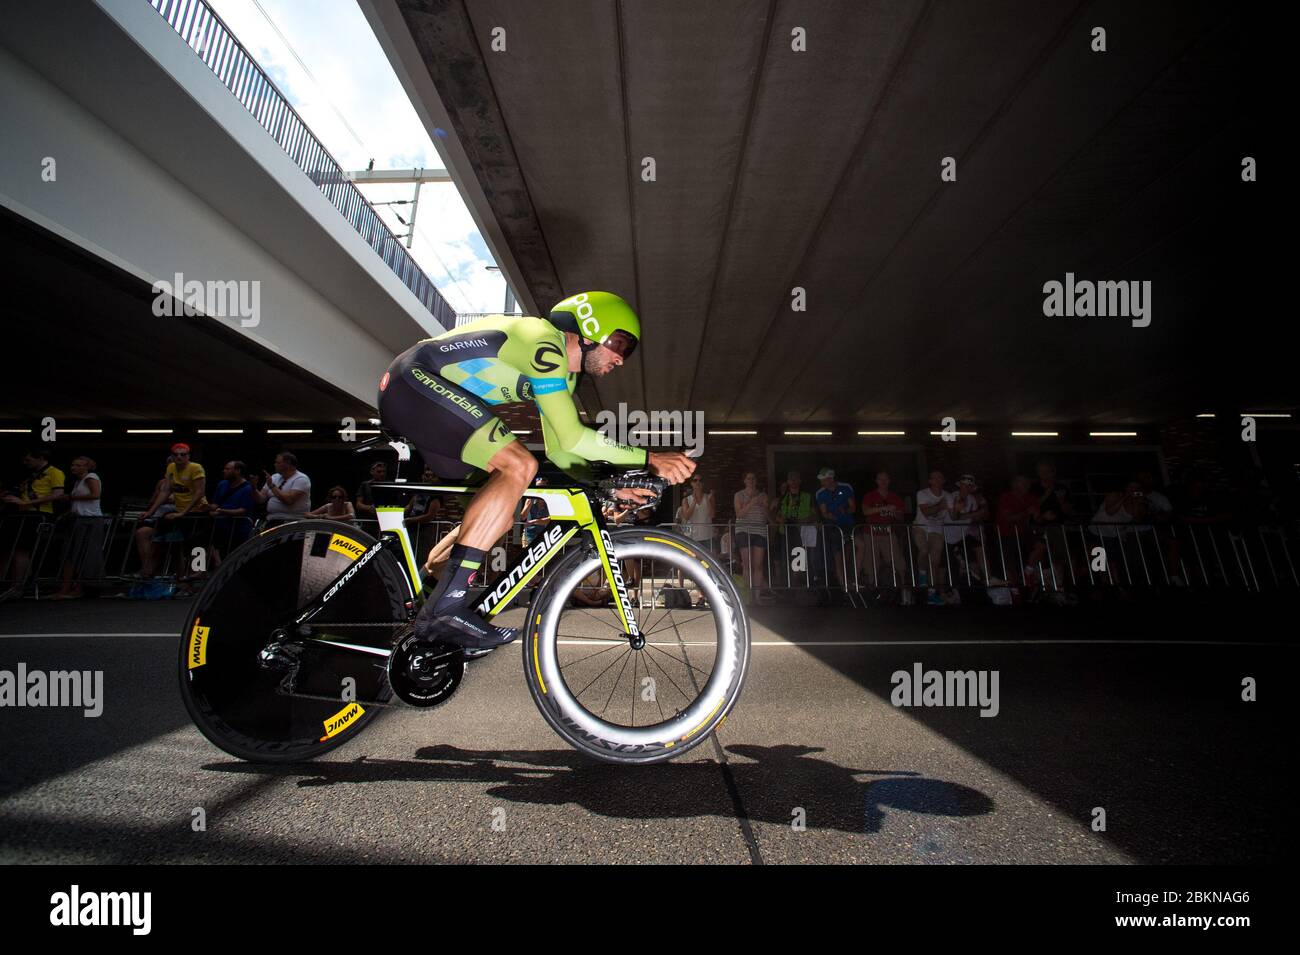 04.07.2015 Utrecht, Netherlands. Nathan Hass during the Individual Time Trial  2015 Tour De France Grand Depart. Stock Photo